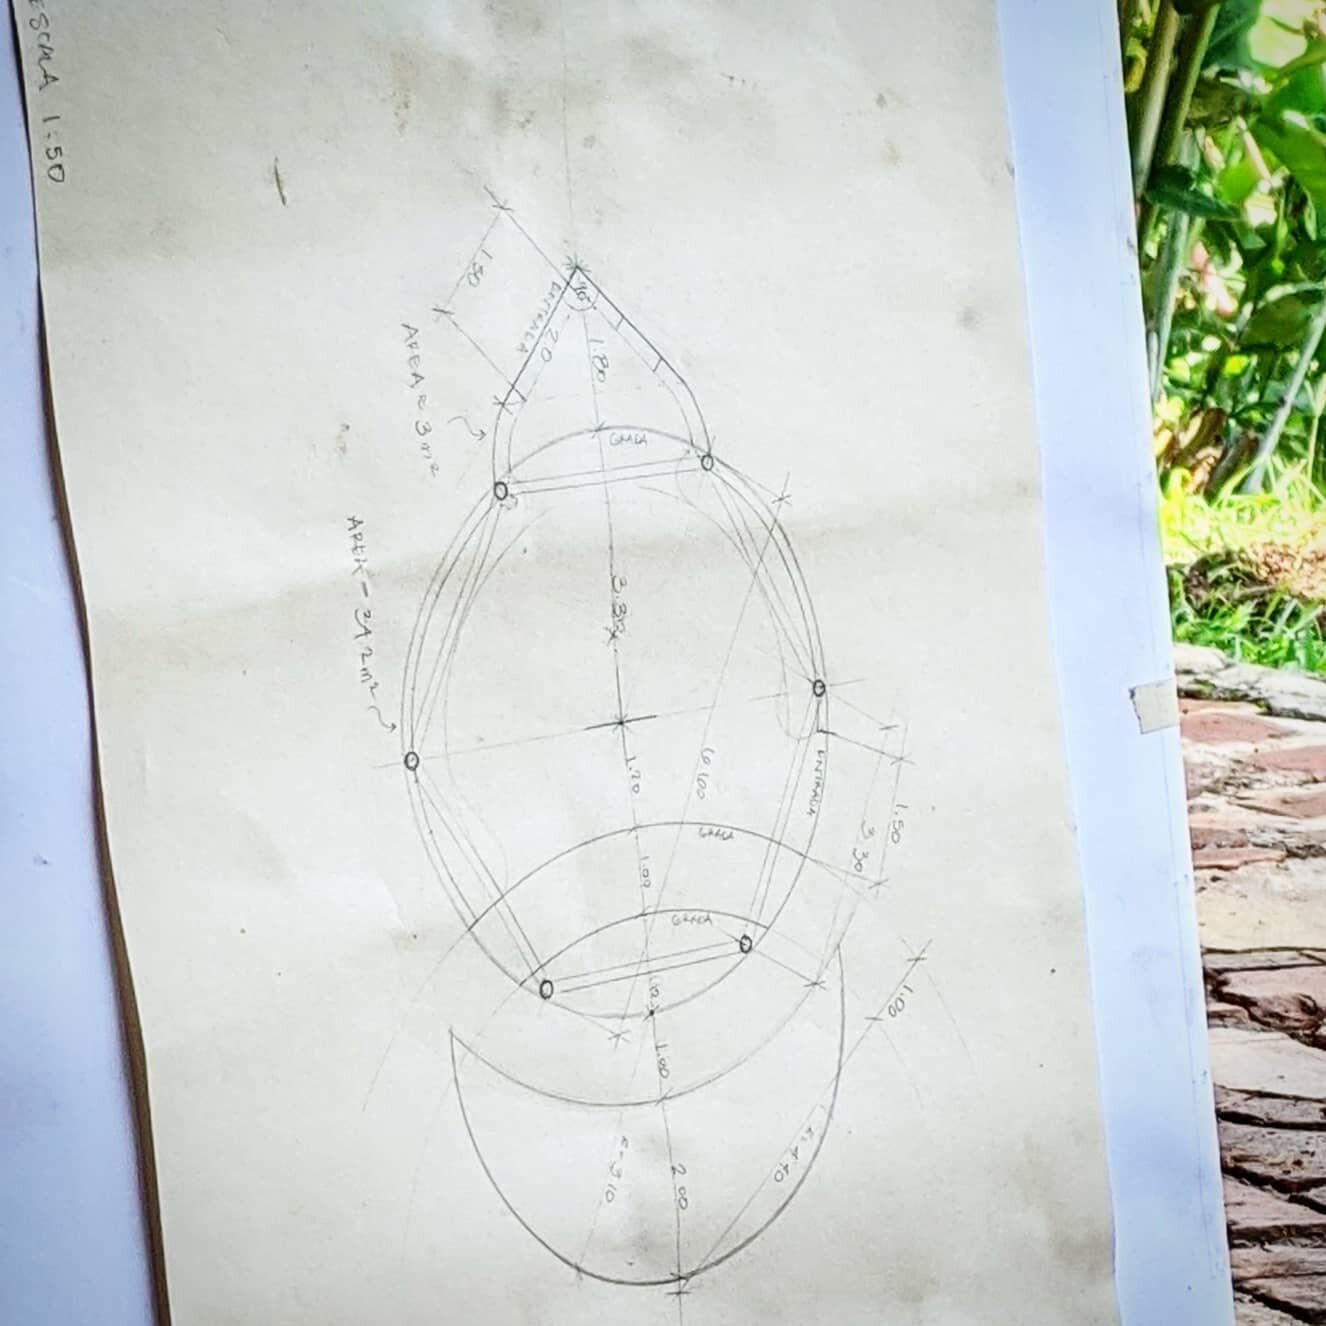 Gaiatica - A sacred space for contemplation and co-creation. A womb-like, organic design which initiates one into contact with the forest and oneself. A community center for an artist colony located in the mountains of Costa Rica.

Follow for progres